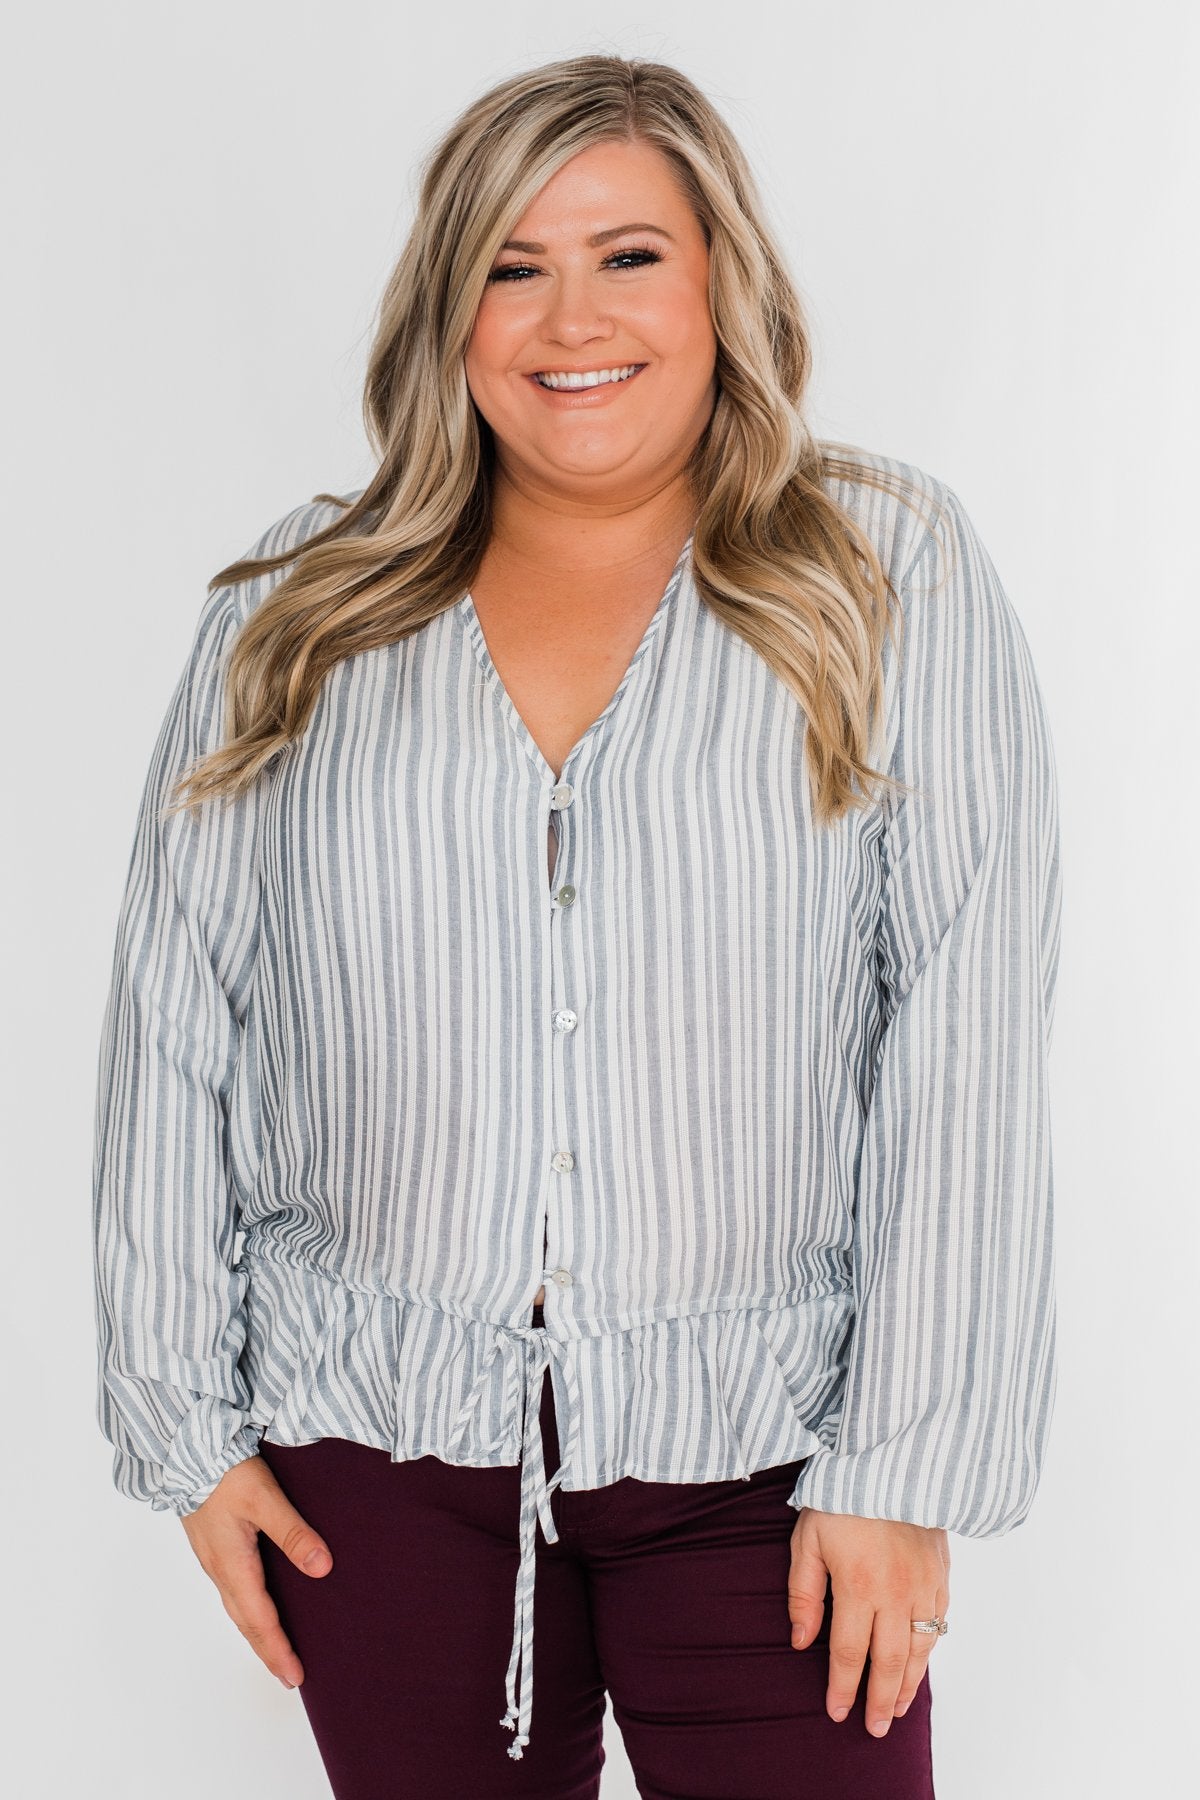 Get To You Striped Blouse- Ivory & Denim Blue